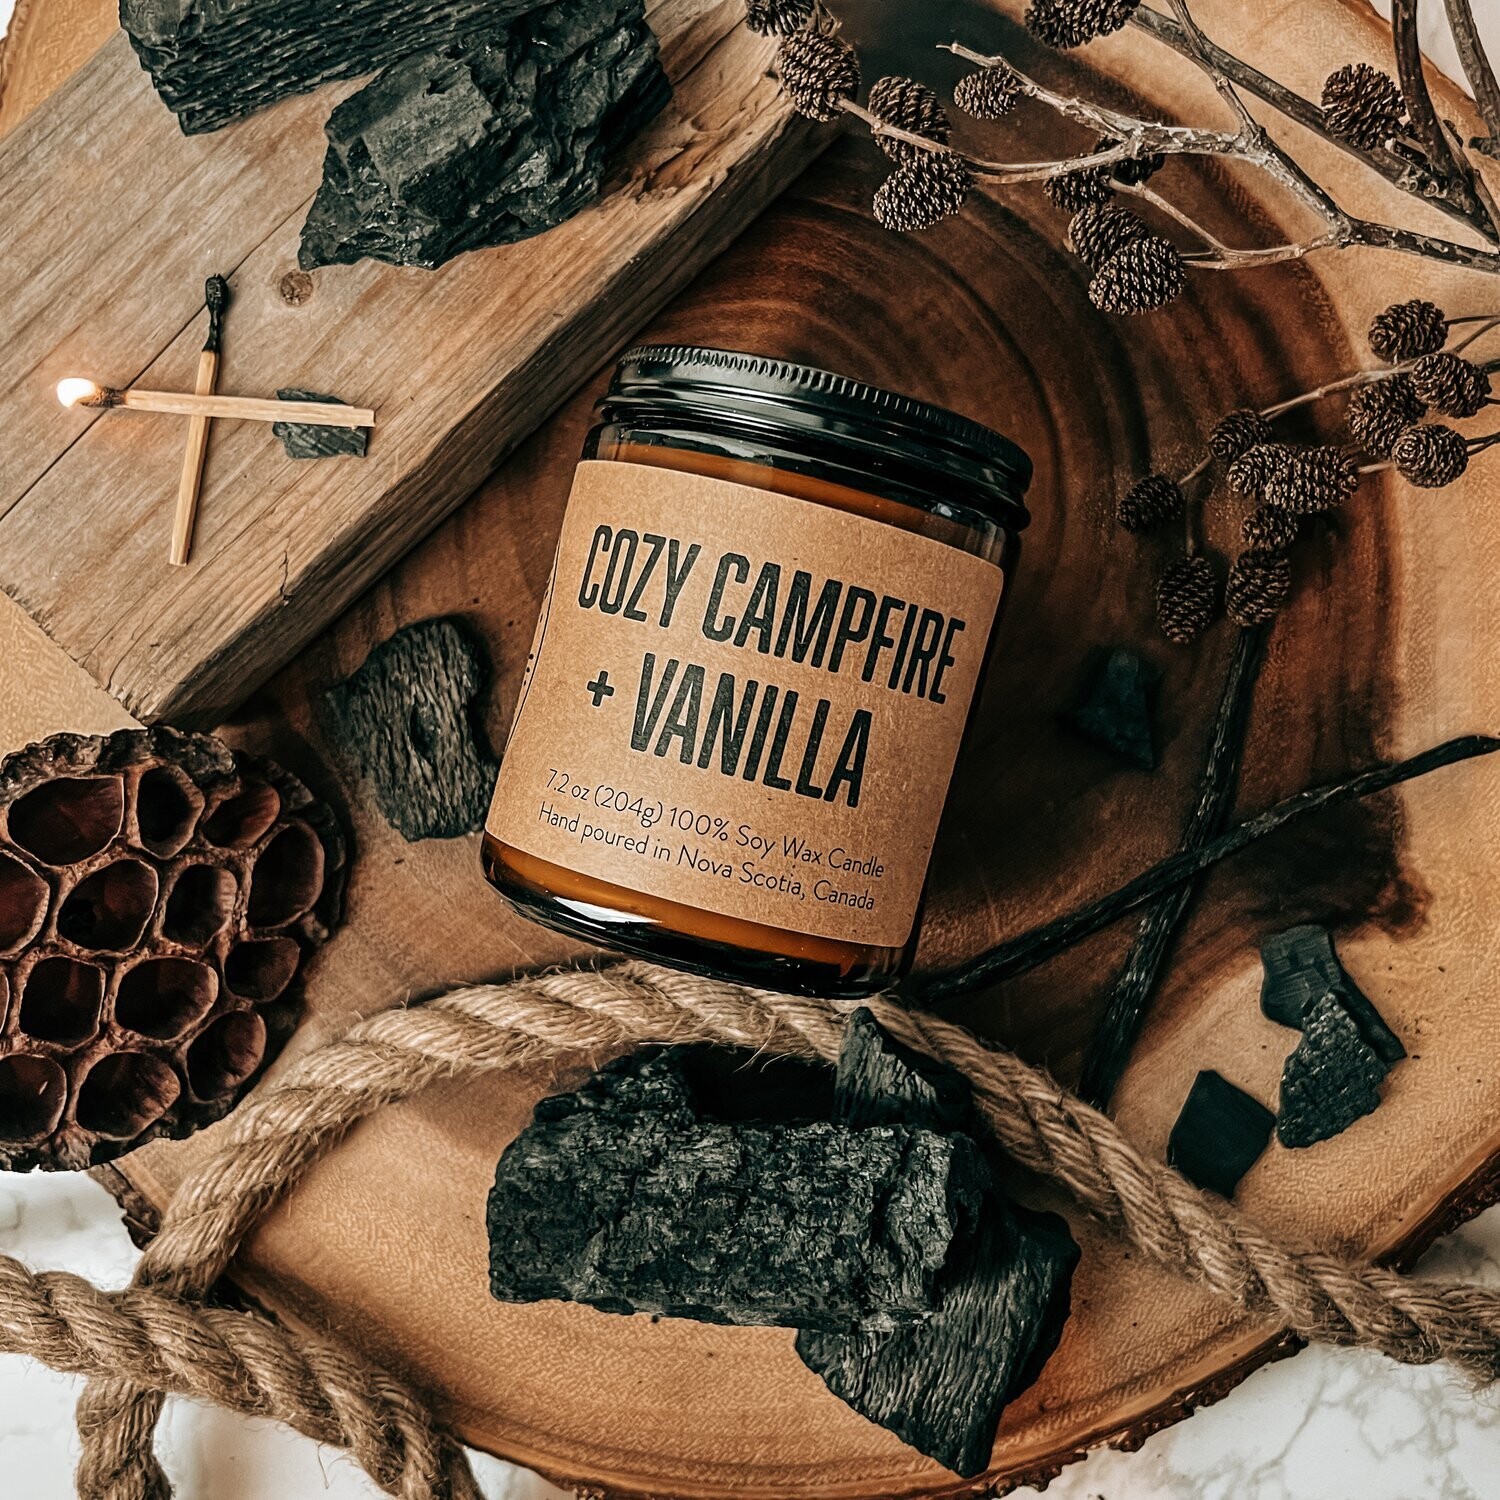 Cozy Campfire and Vanilla- Lawrencetown Candle Co.